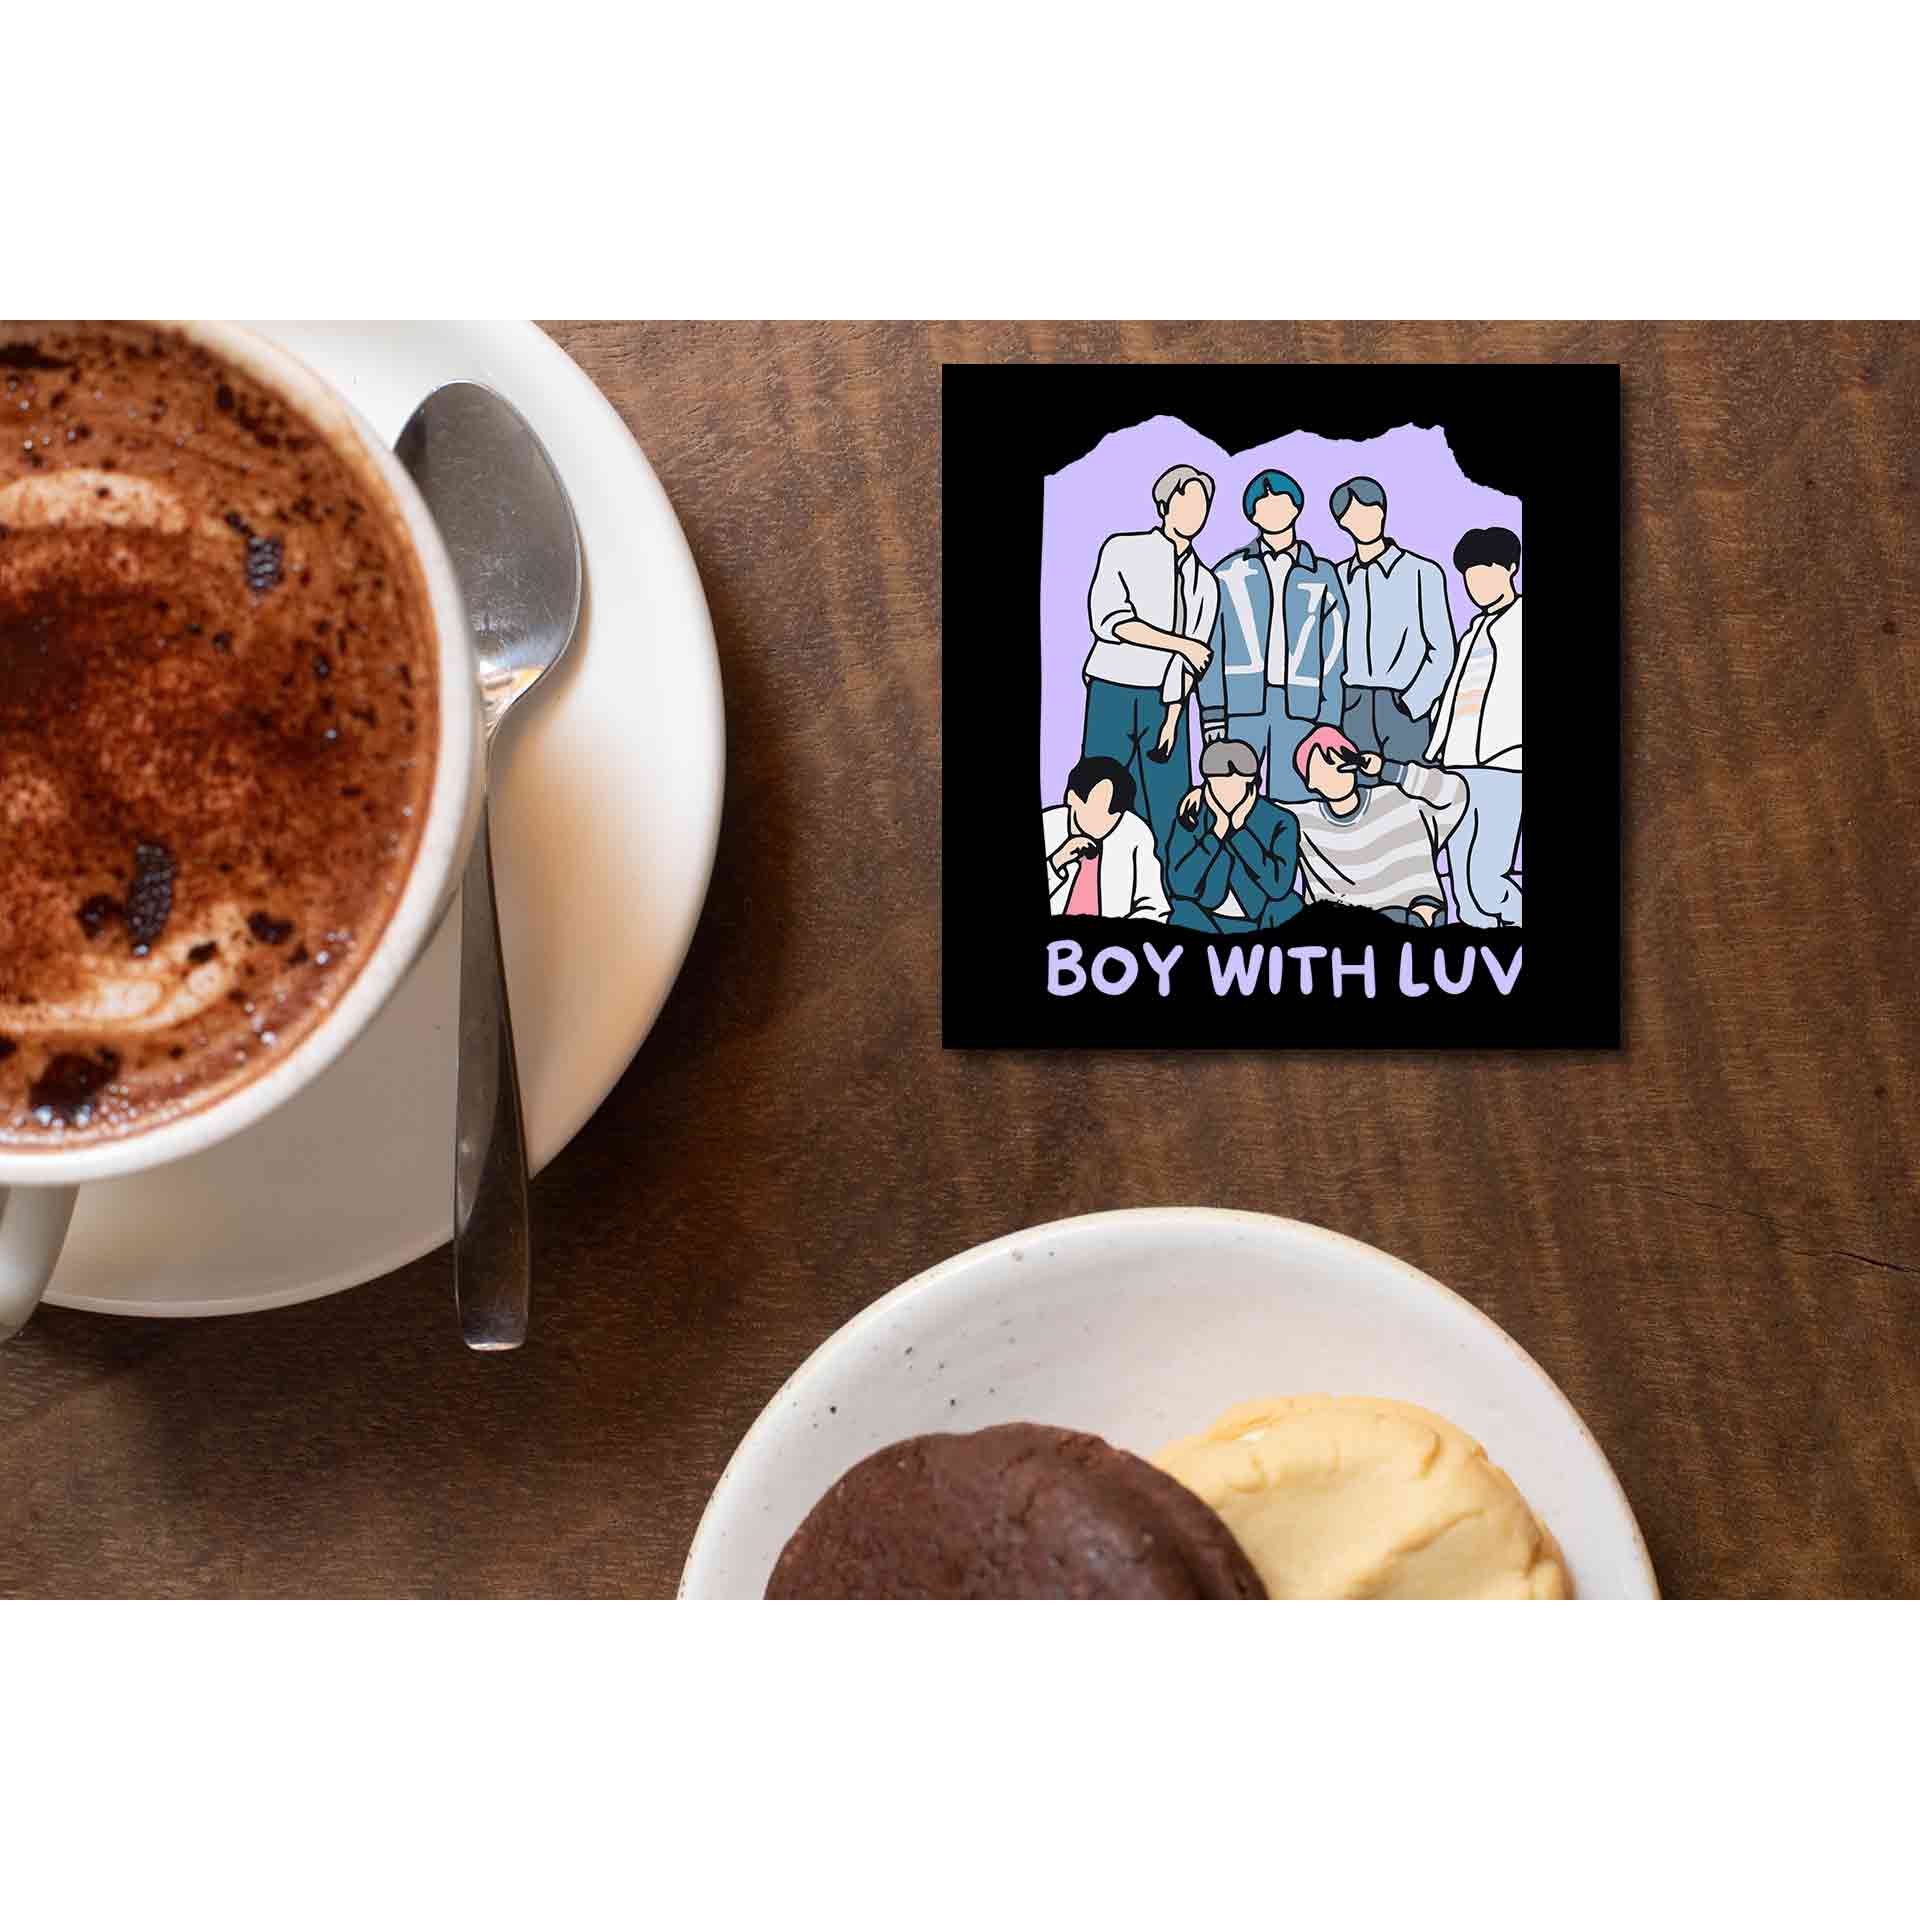 bts boy with luv coasters wooden table cups indian music band buy online india the banyan tee tbt men women girls boys unisex  